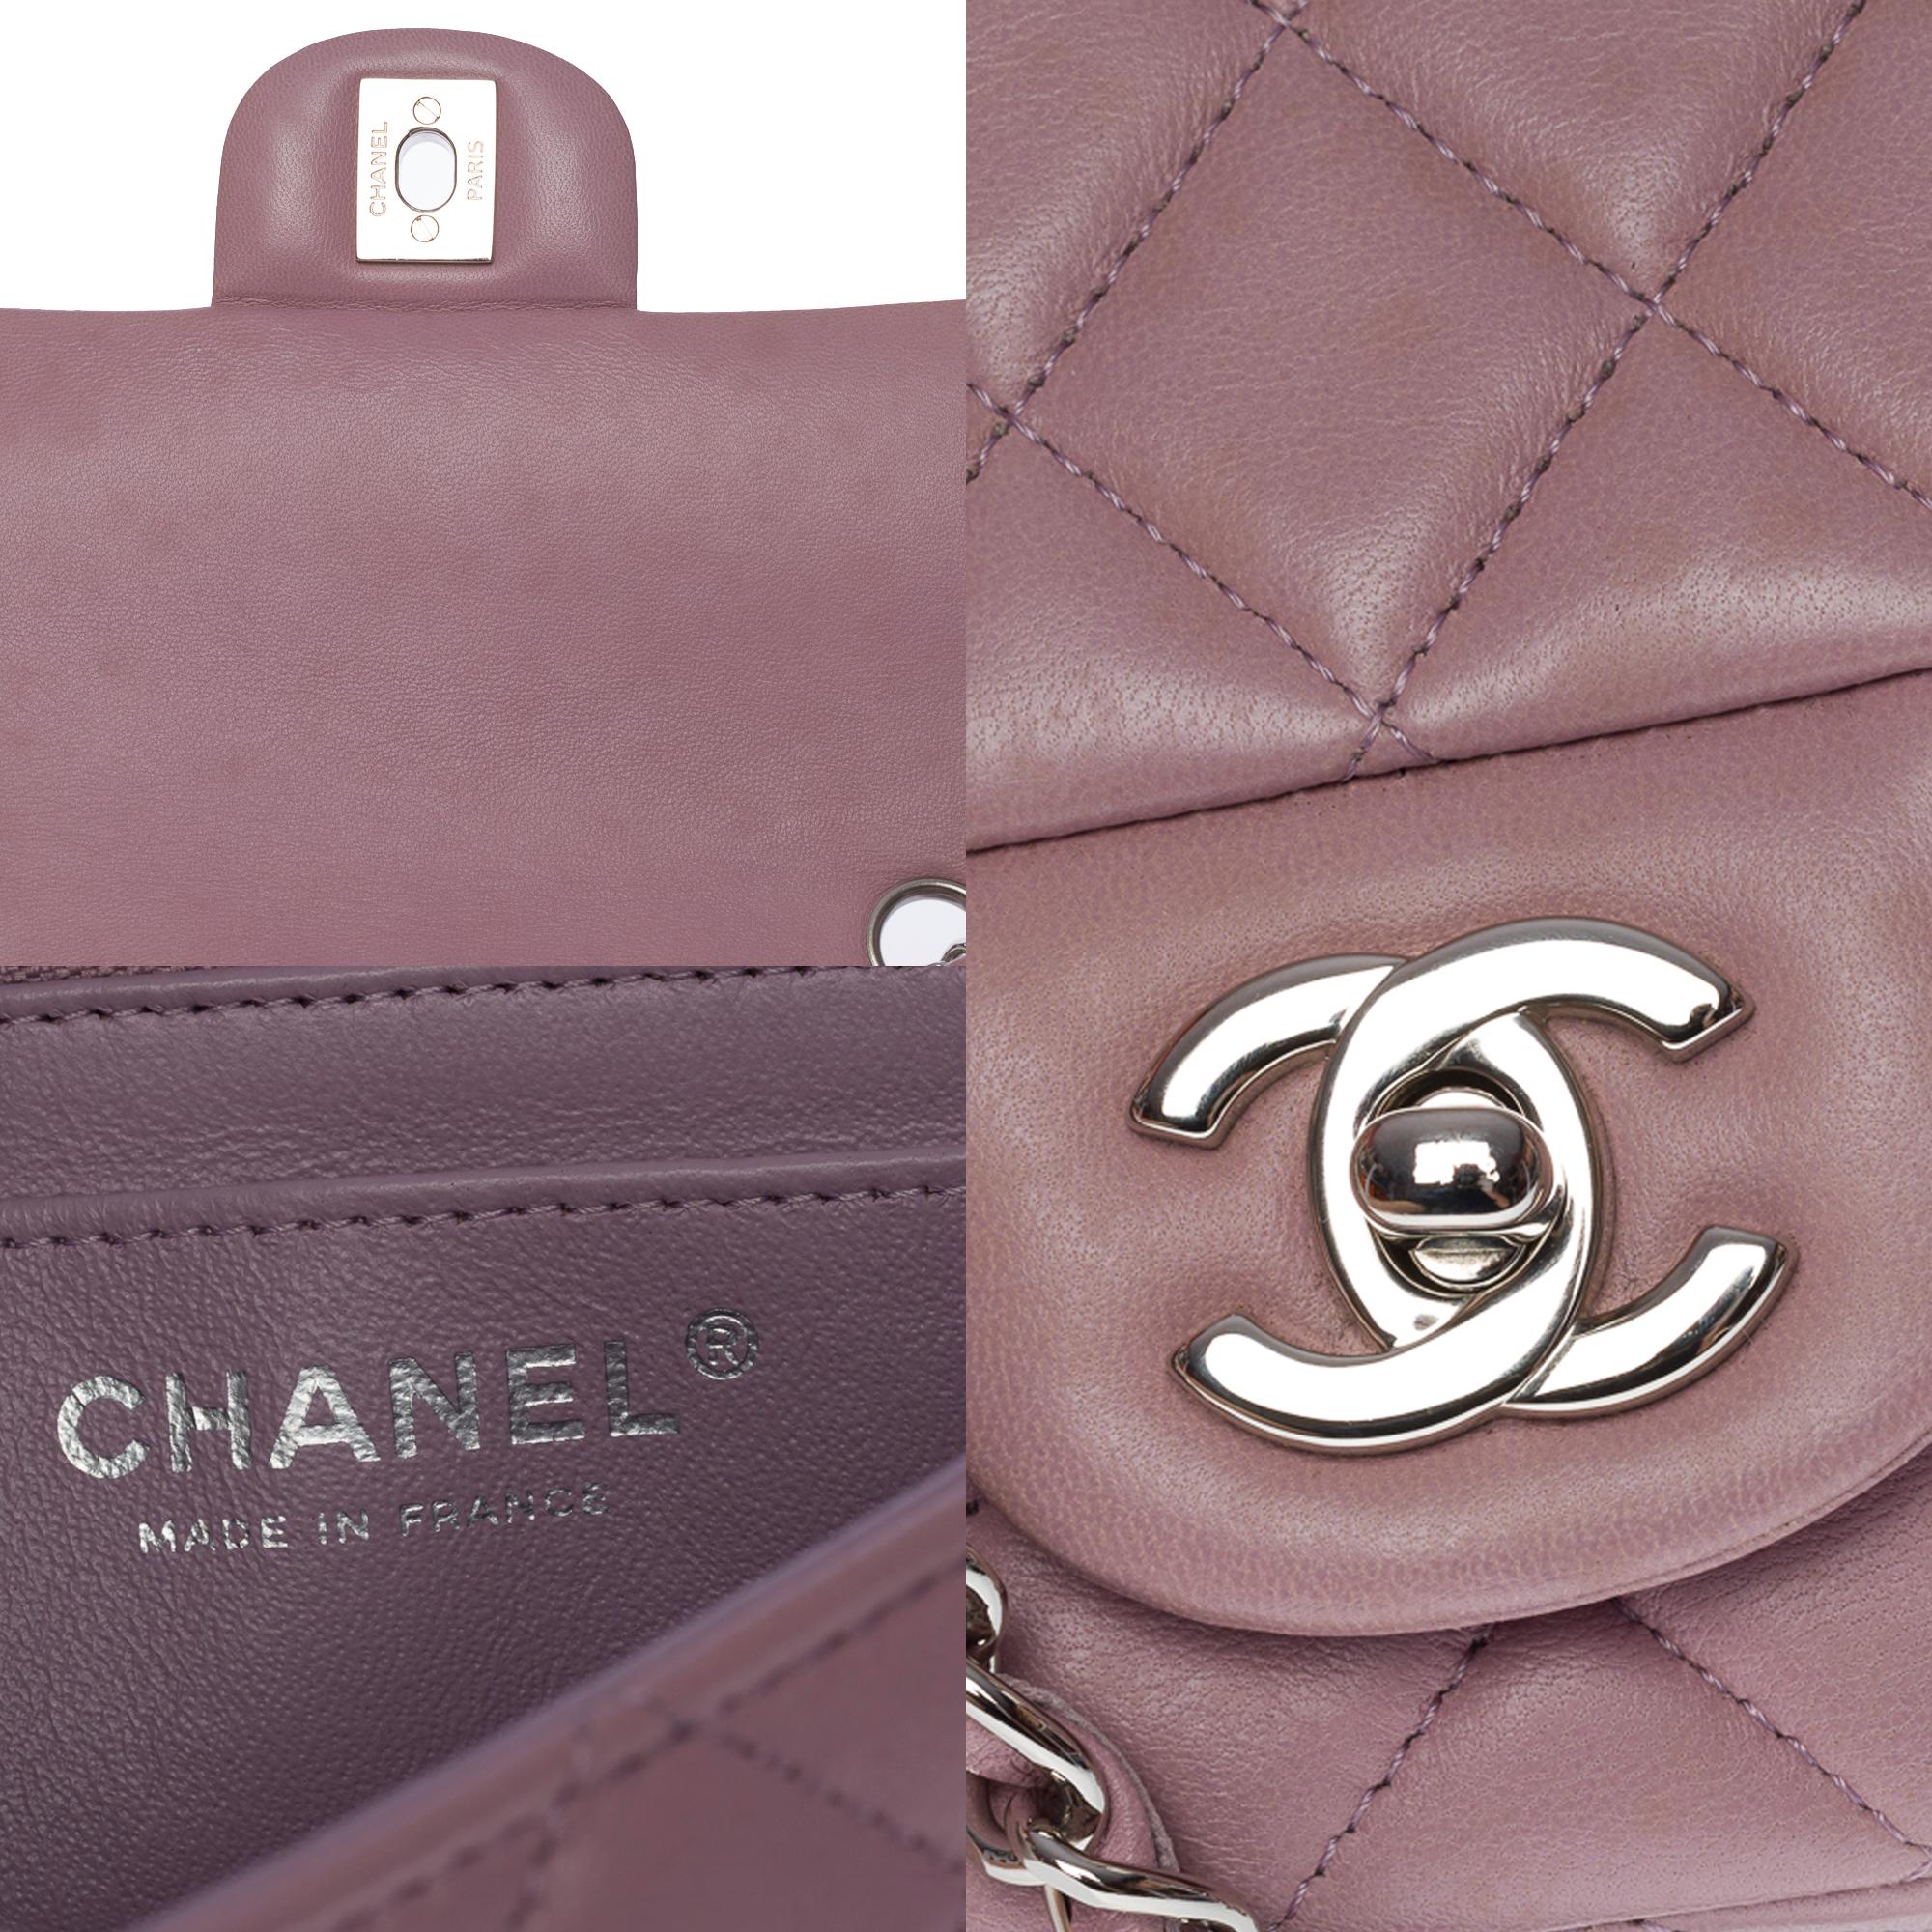 Splendid Chanel Timeless Mini Flap bag in lilac quilted lambskin leather, SHW 2